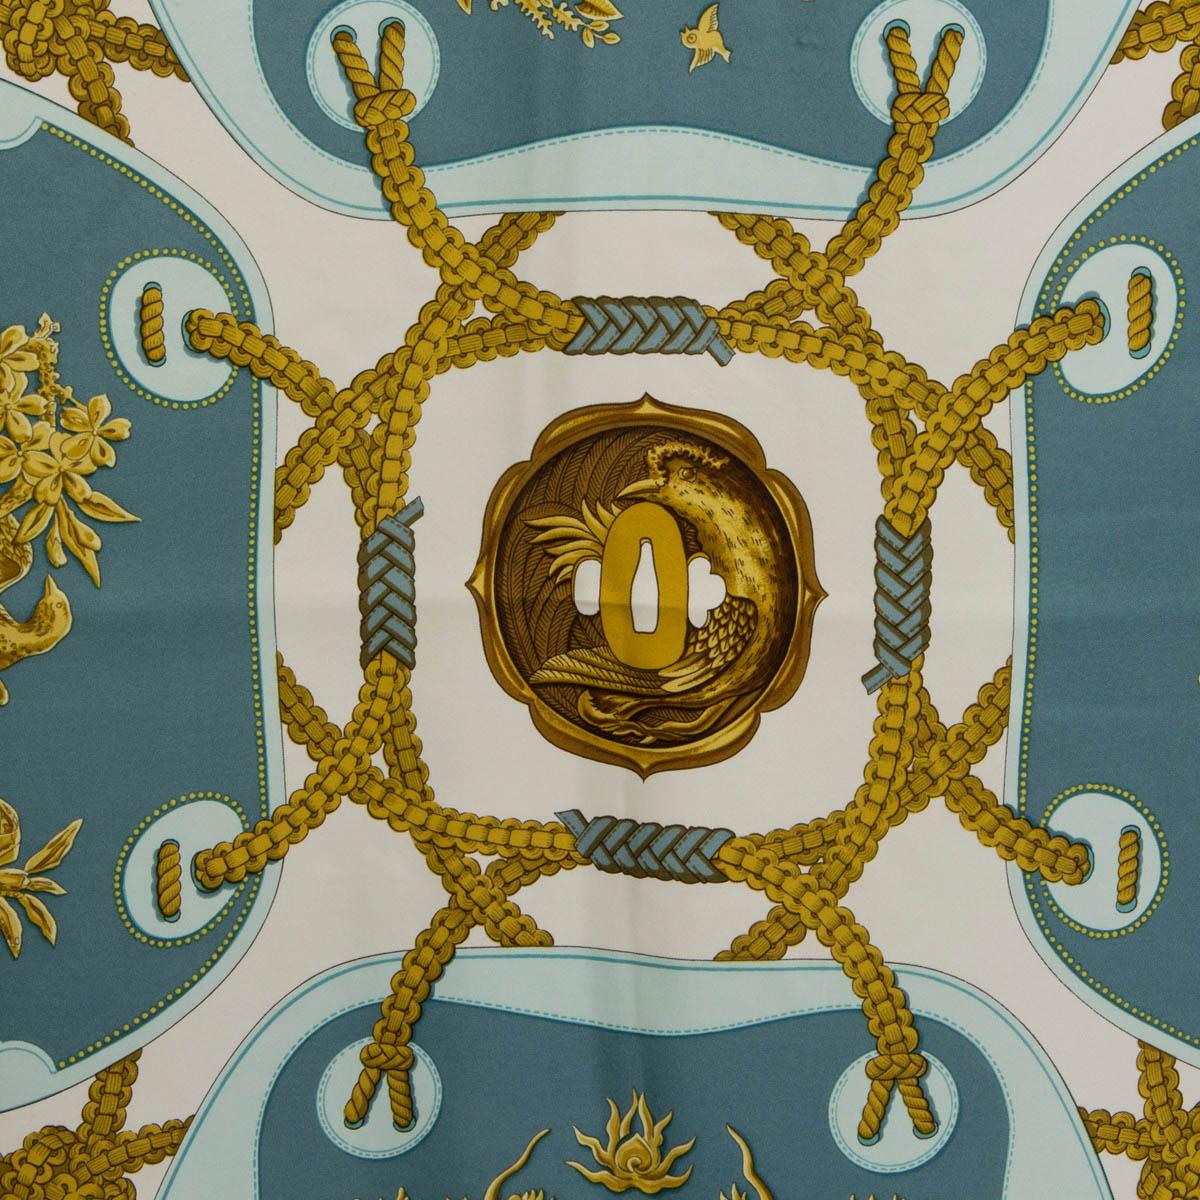 100% authentic Hermès Tsubas silk (100%) scarf designed by Christiane Vauzelles in pale blue, pale petrol and white with details in gold and brown. A tsubas is the handle or protective guard of a Japanese sword, typically embellished with carvings